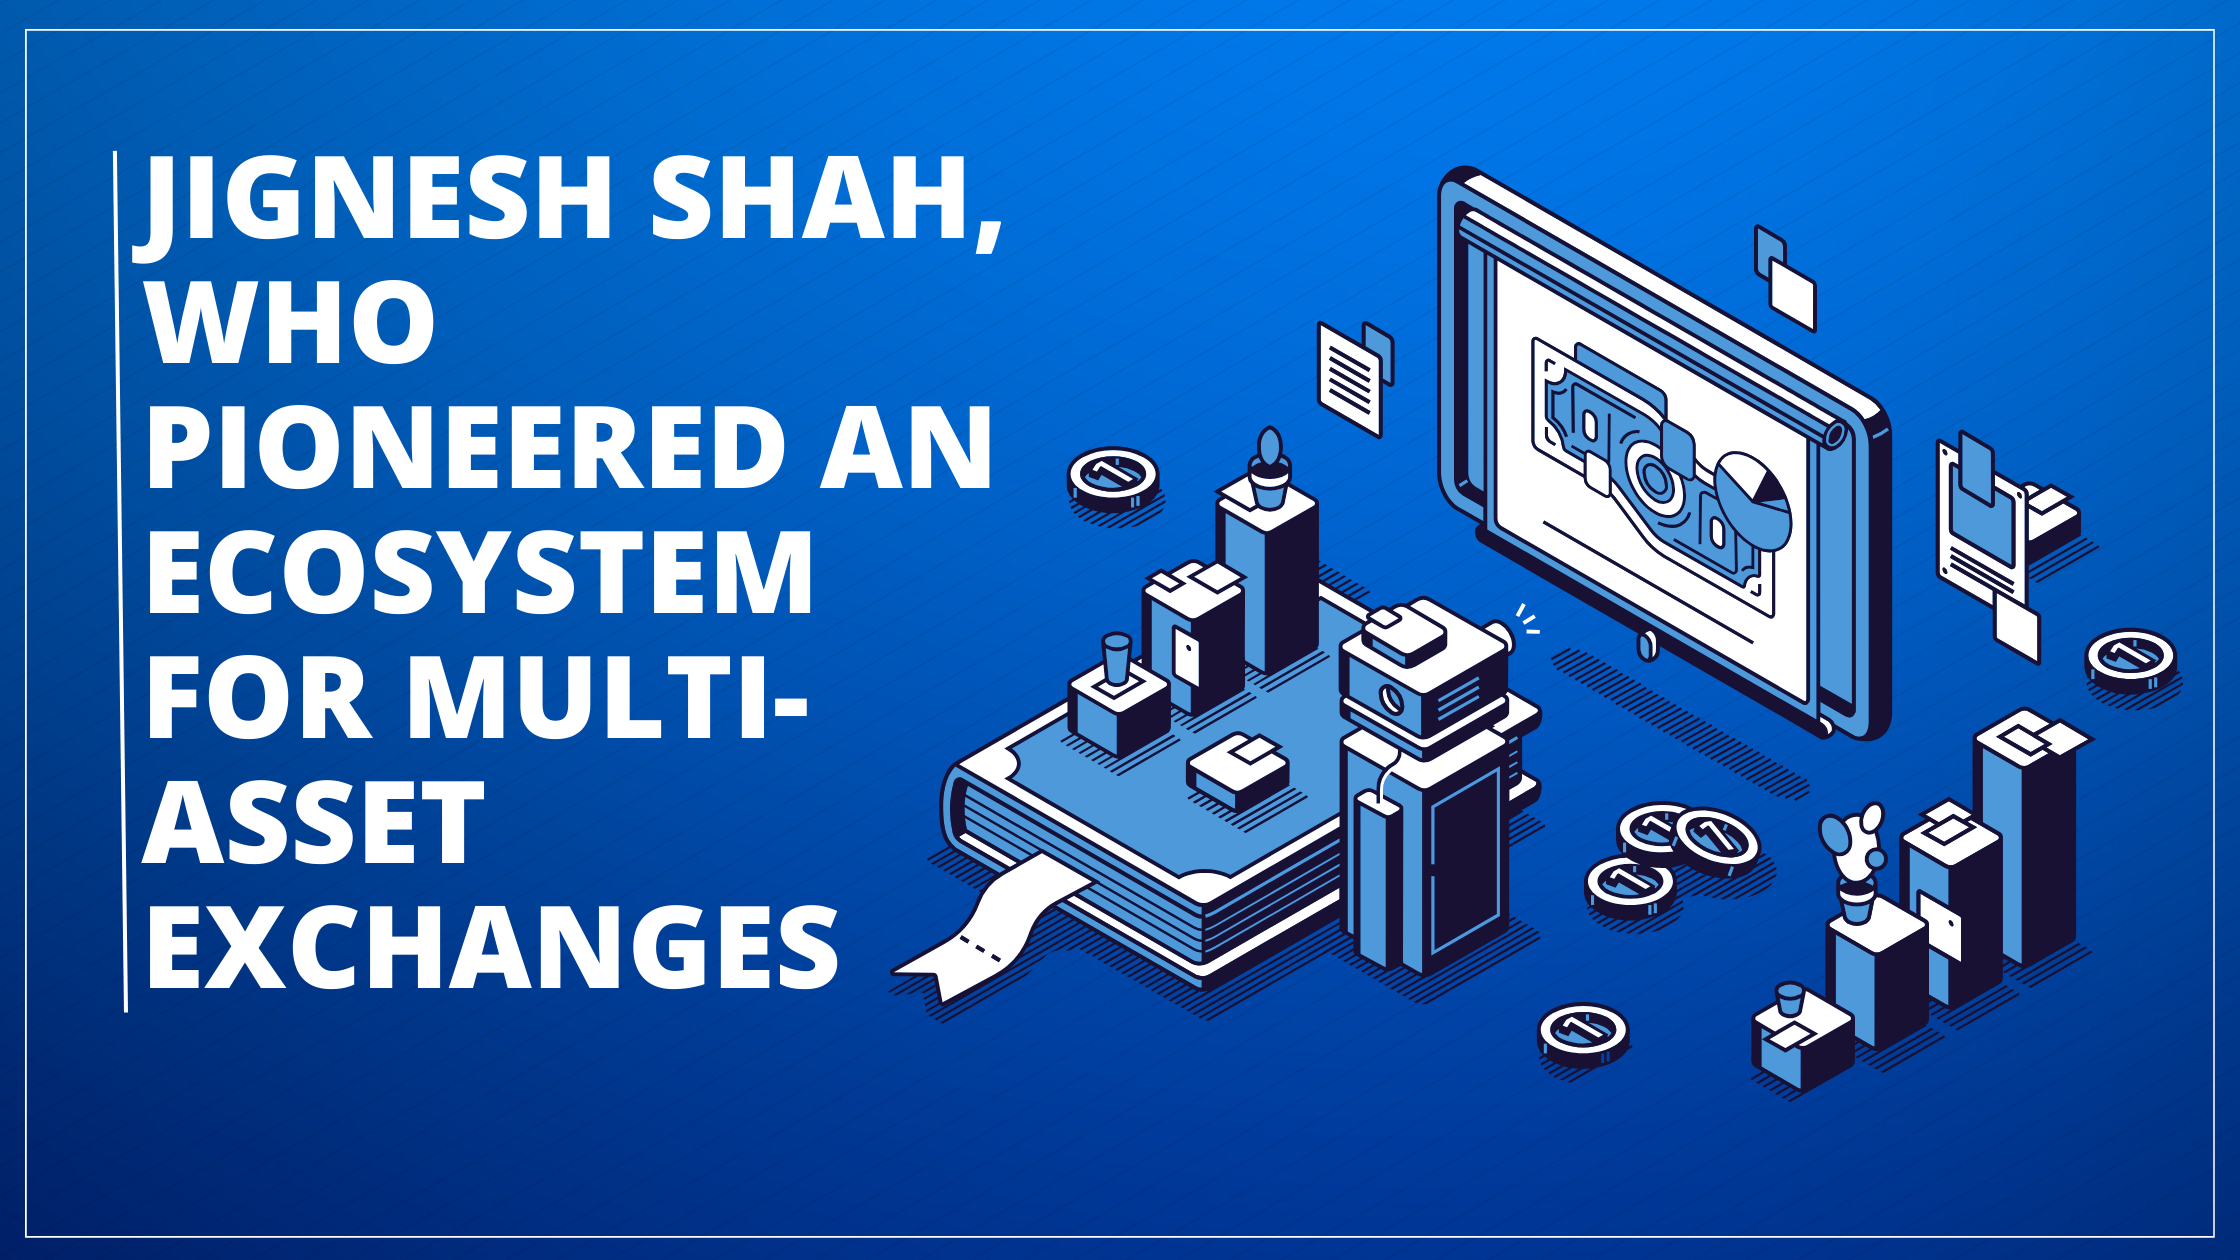 You are currently viewing Jignesh Shah, who pioneered an ecosystem for multi-asset exchanges